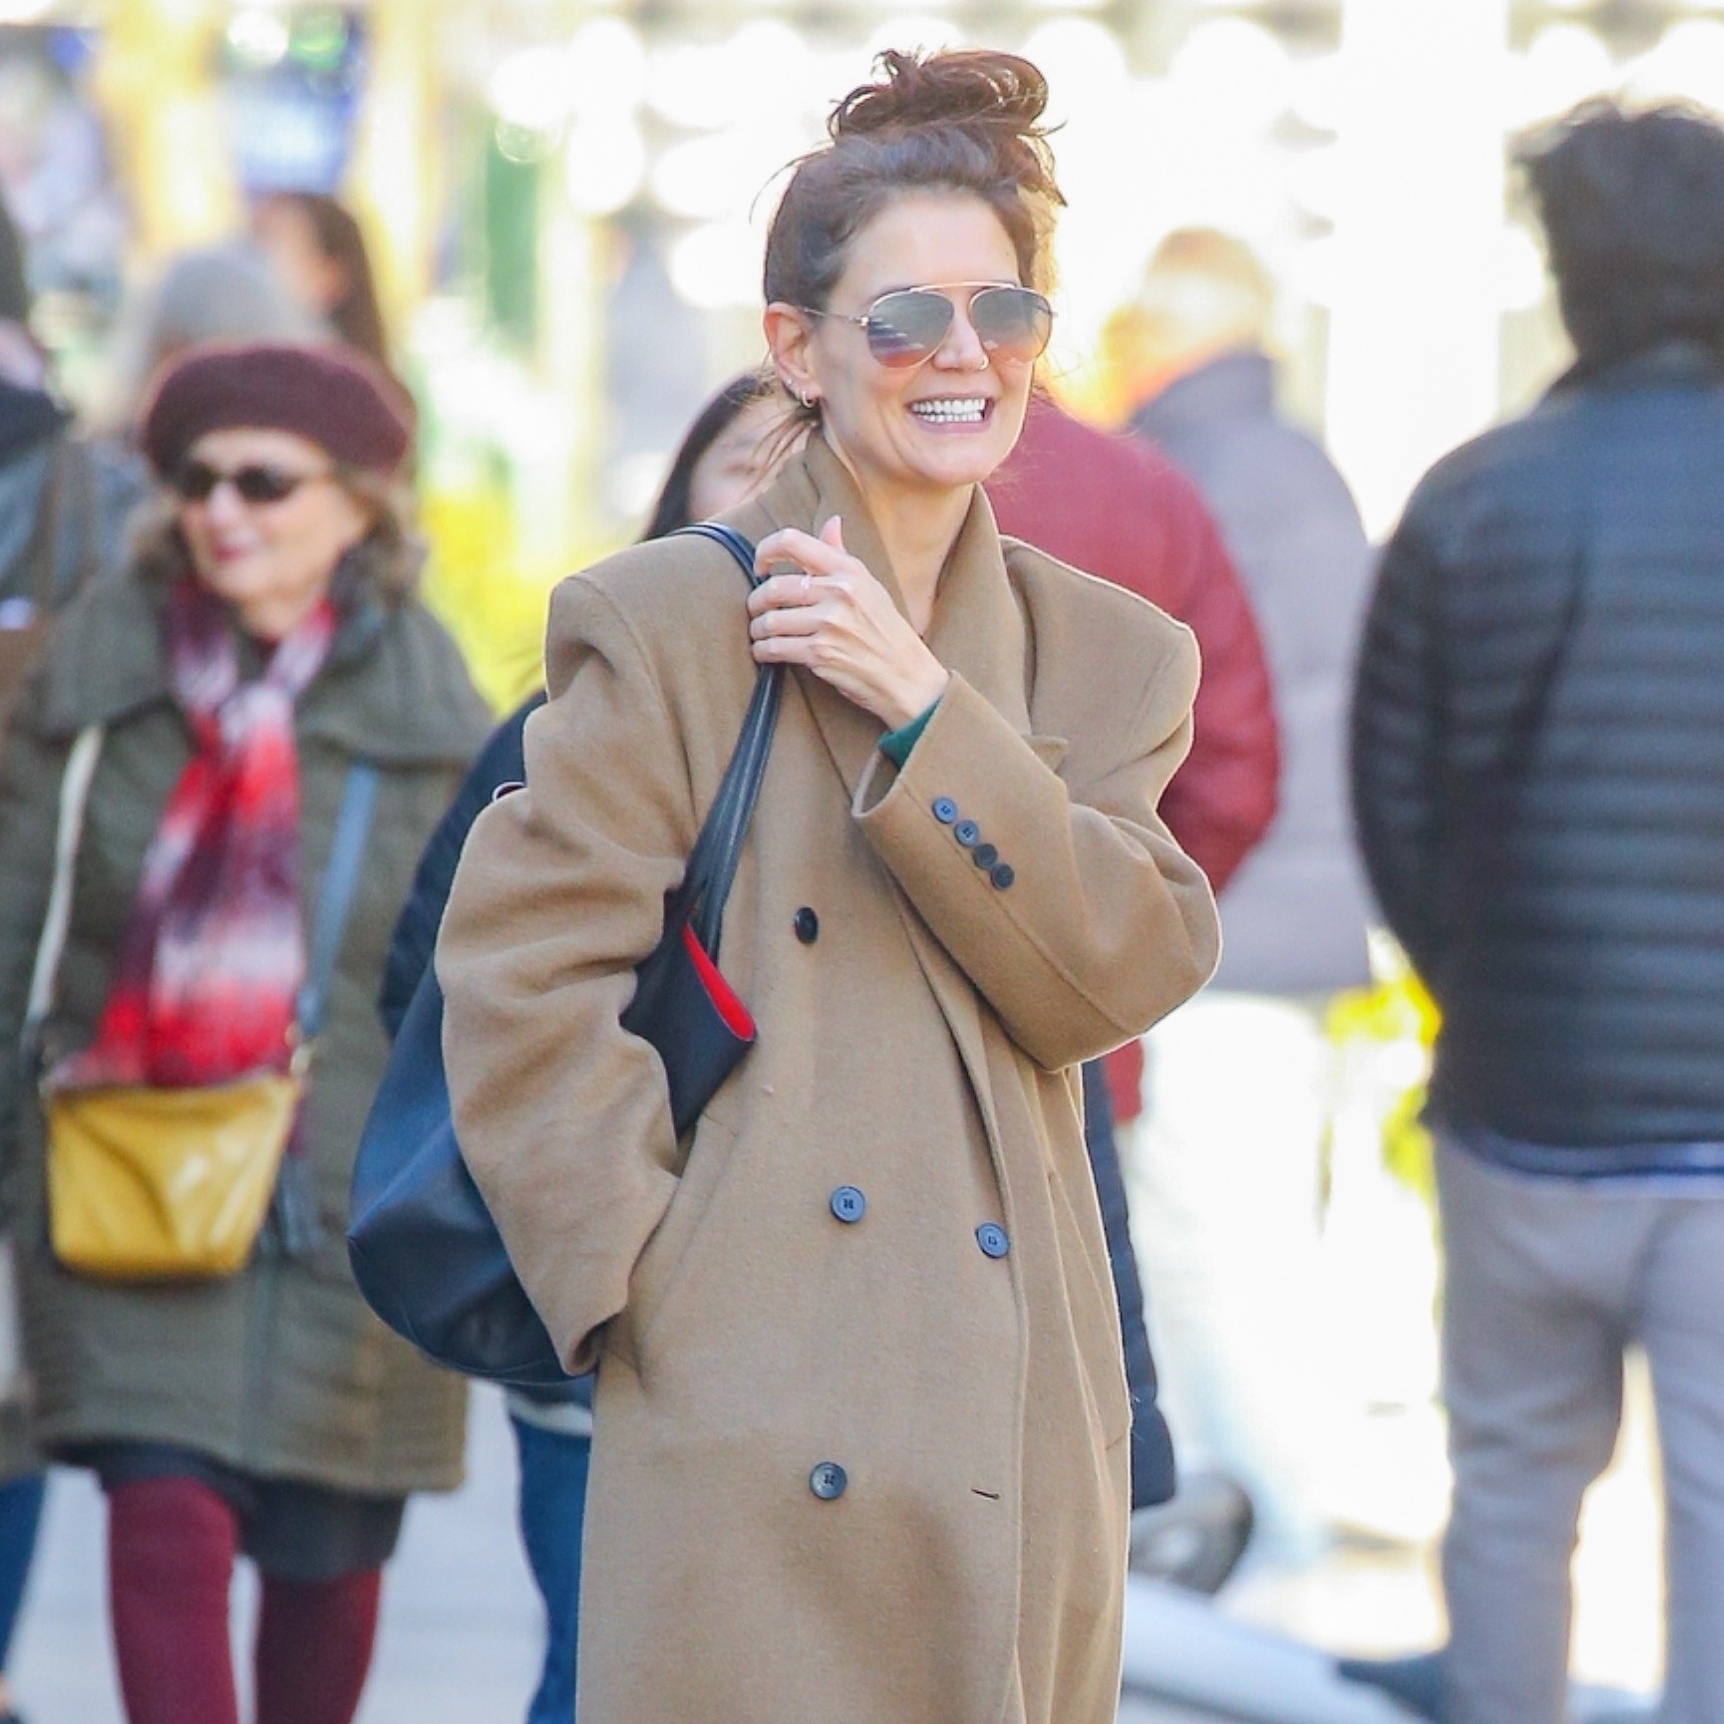 Katie Holmes Wearing Sweatpants With a Blazer Is Your New Favorite